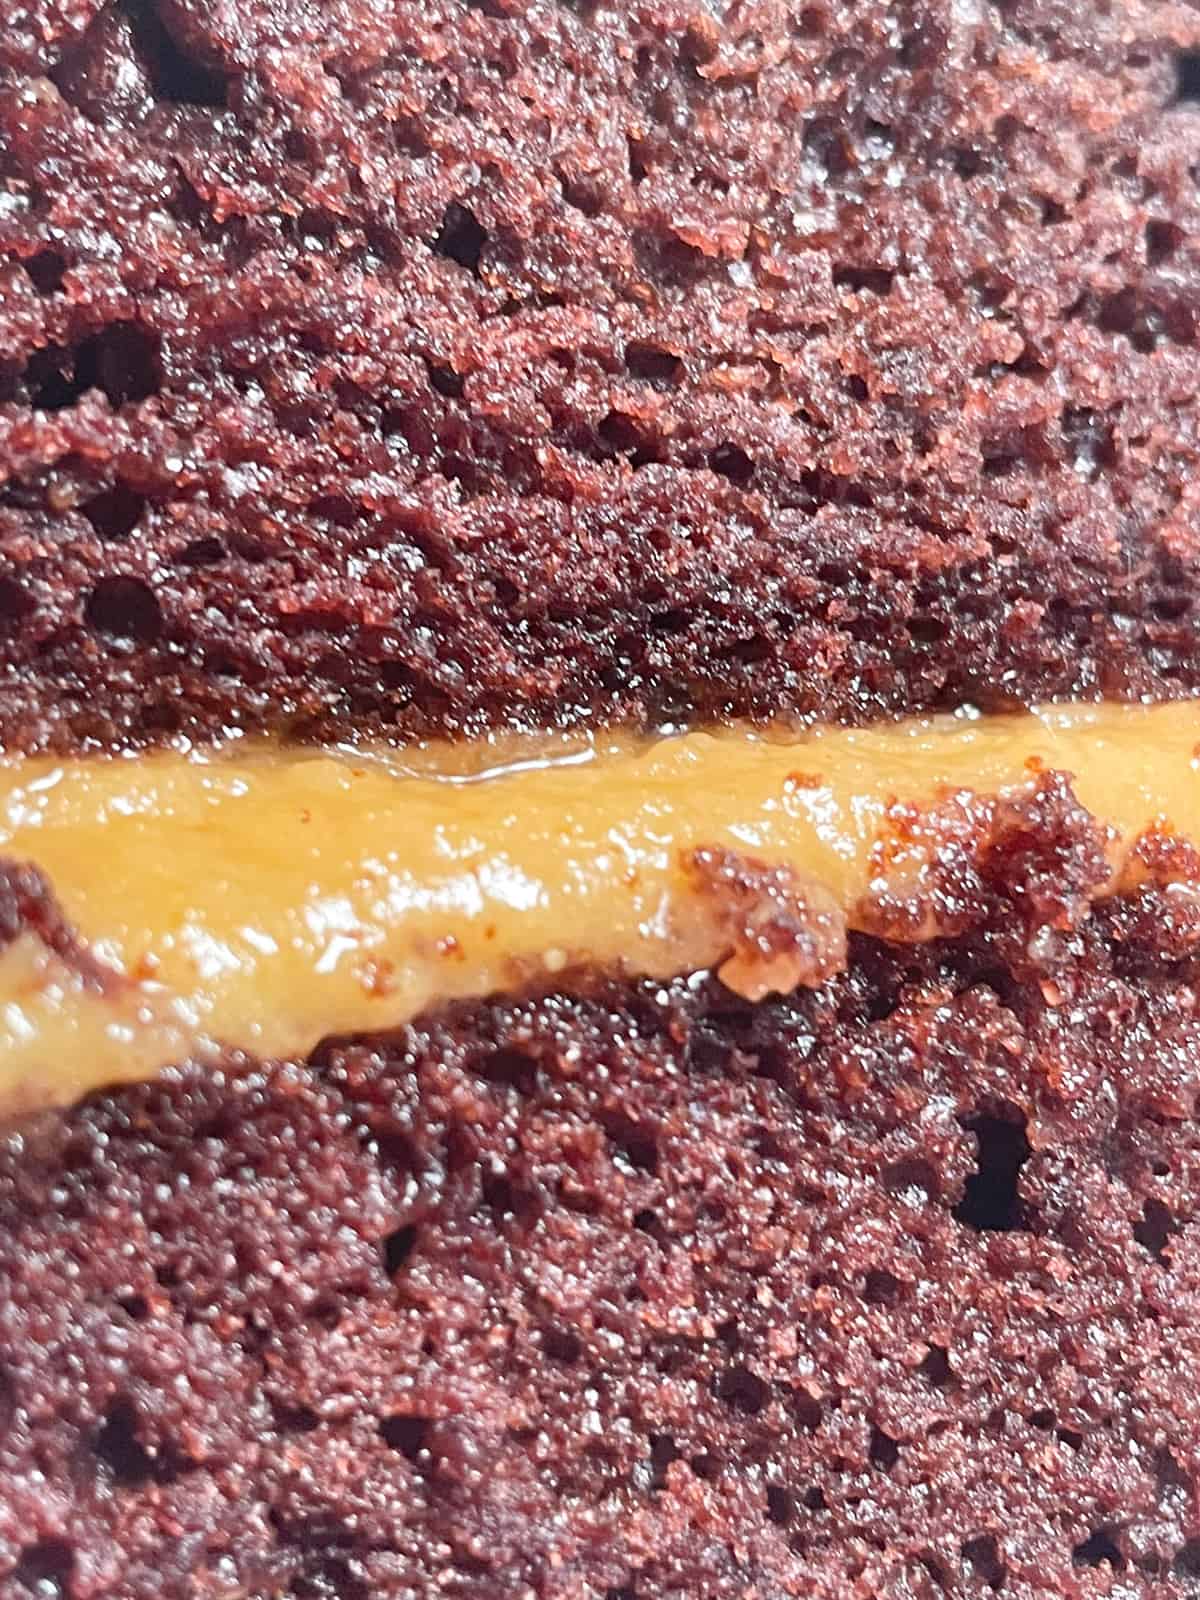 A zoomed in shot of the texture of the cake and filling.